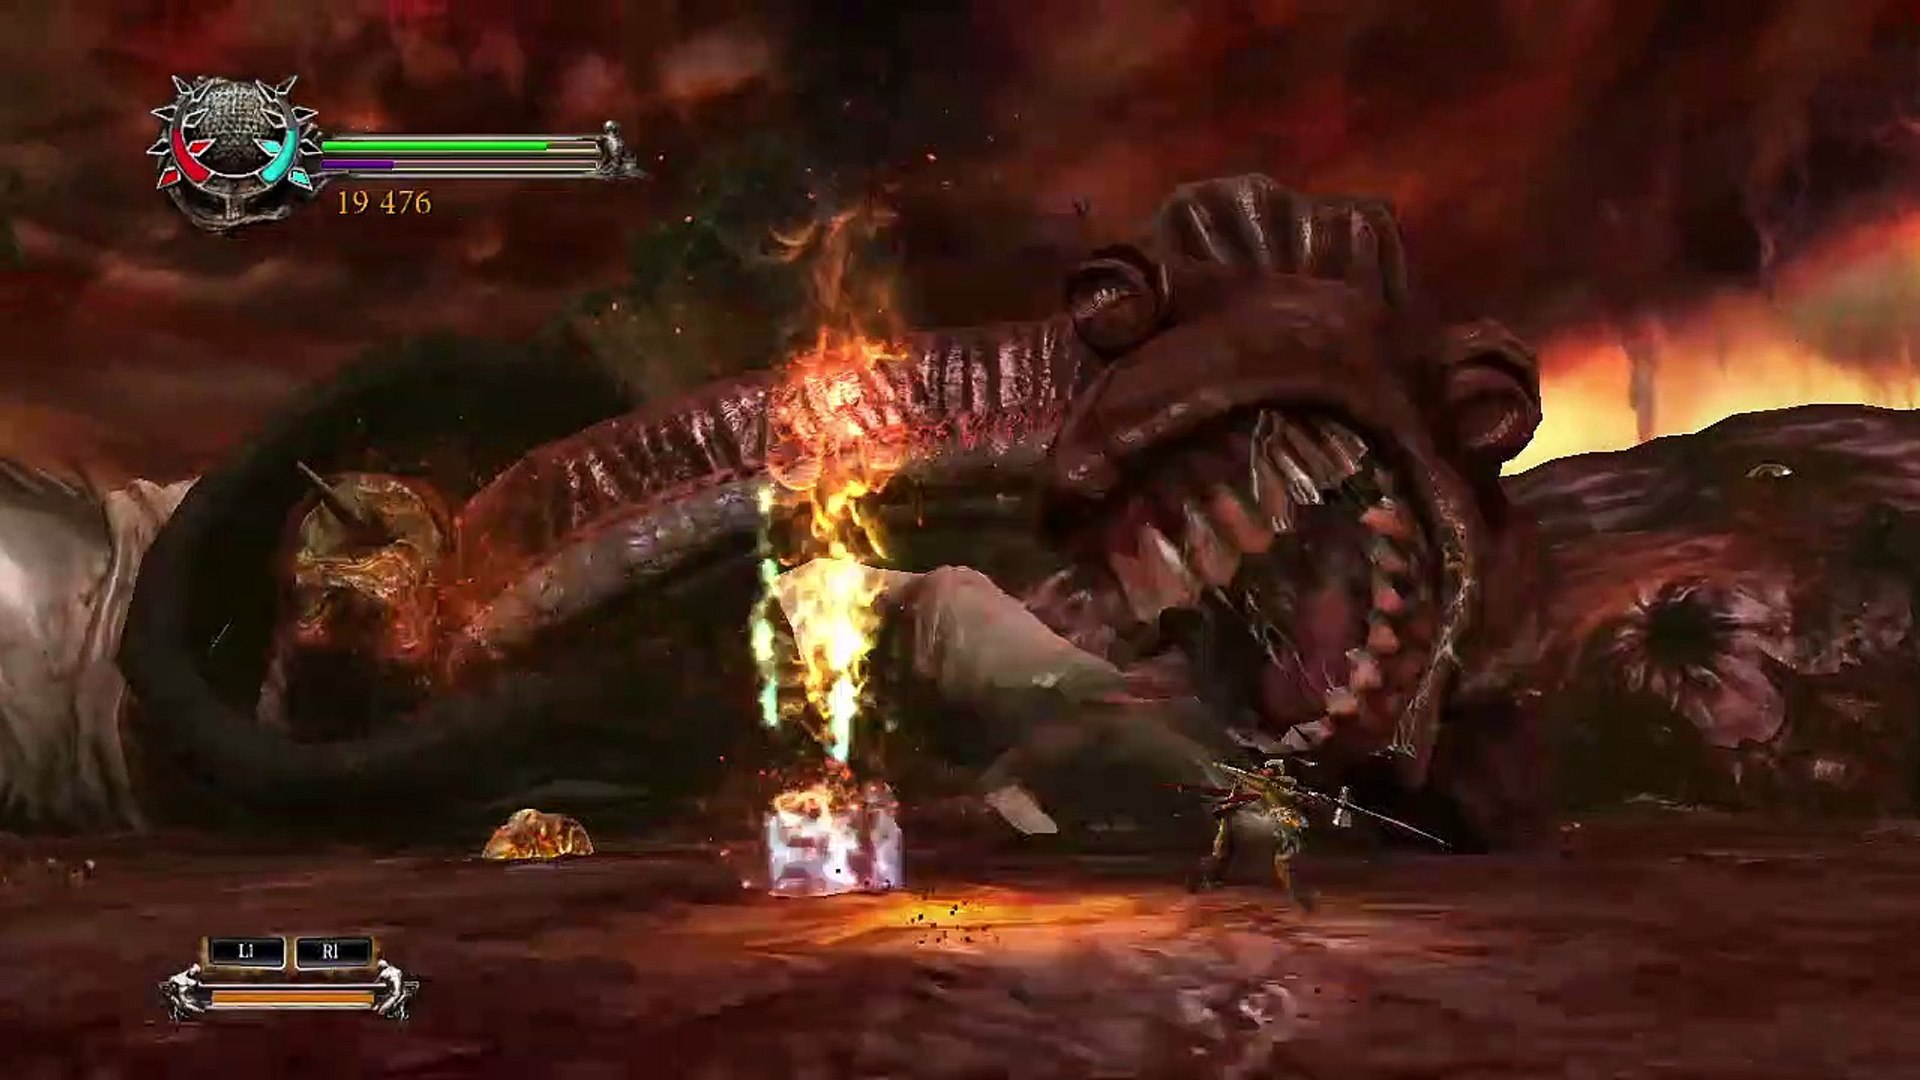 Dante's Inferno: Divine Edition online multiplayer - ps3 - Vidéo Dailymotion